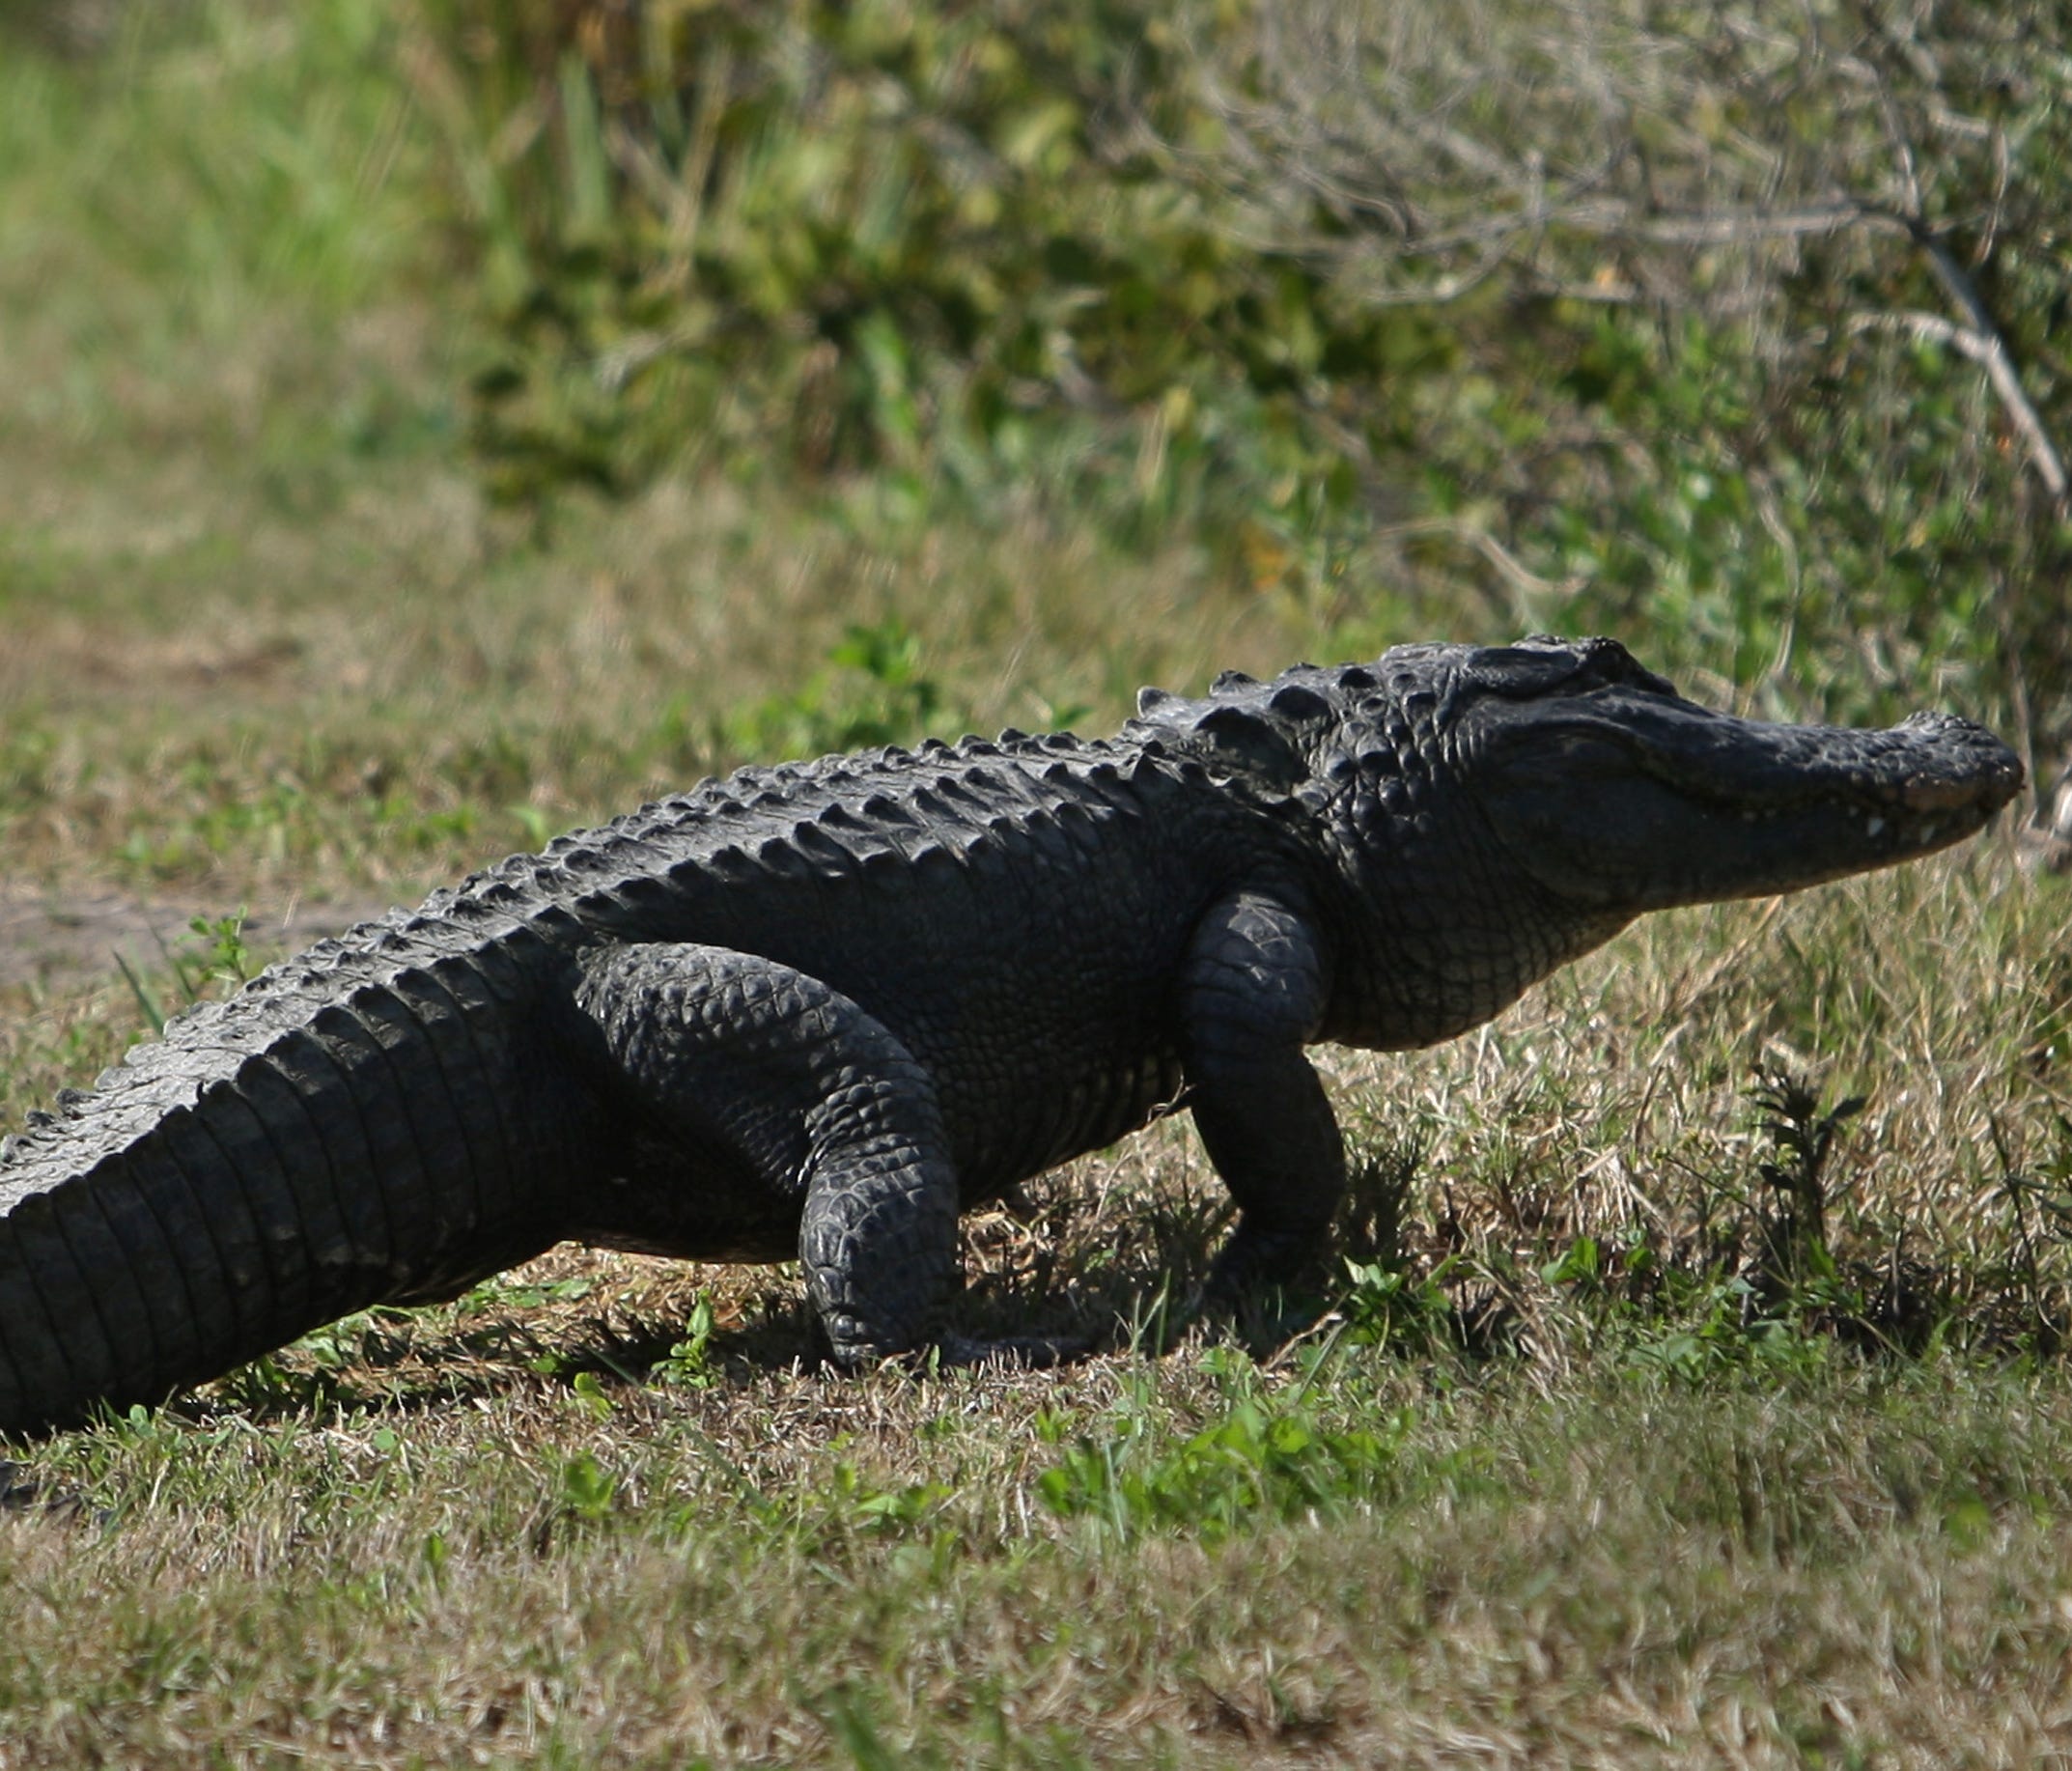 This file photo from Feb. 5, 2008, shows an alligator near  Cape Canaveral, Fla.